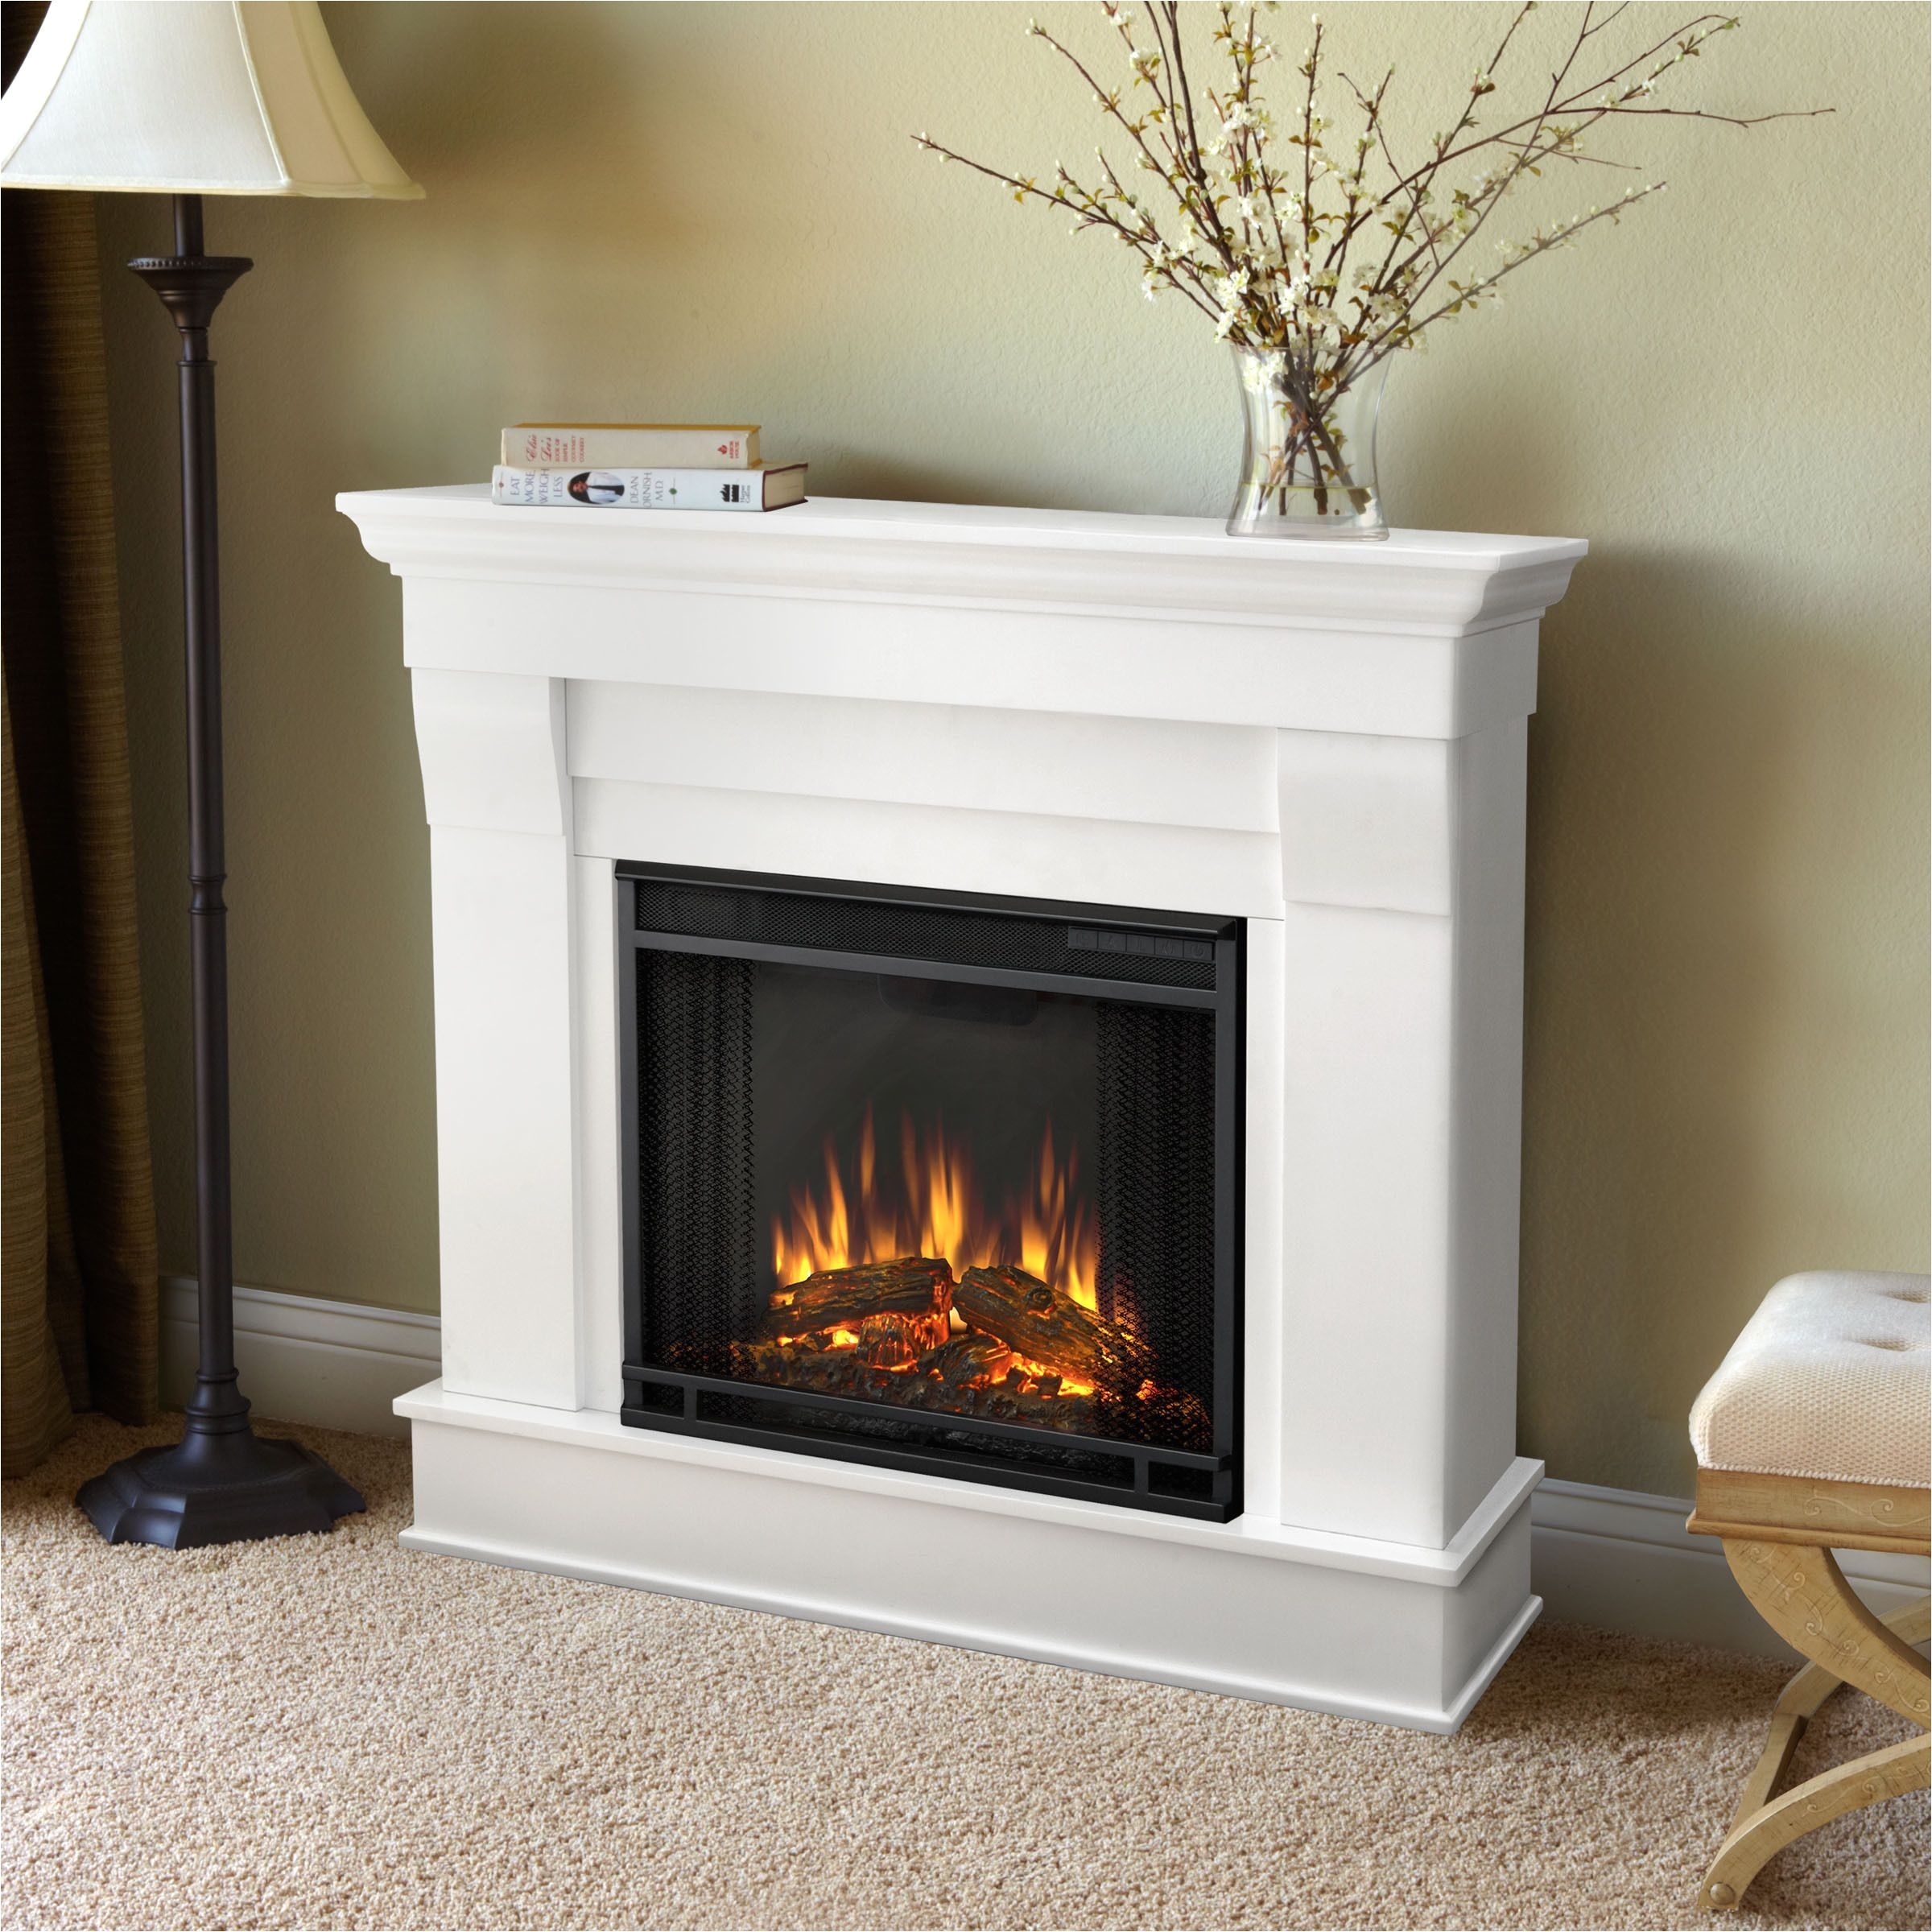 Real Flame Fireplace Fresh Fake Fire Picture for Fireplace Real Flame Chateau Electric